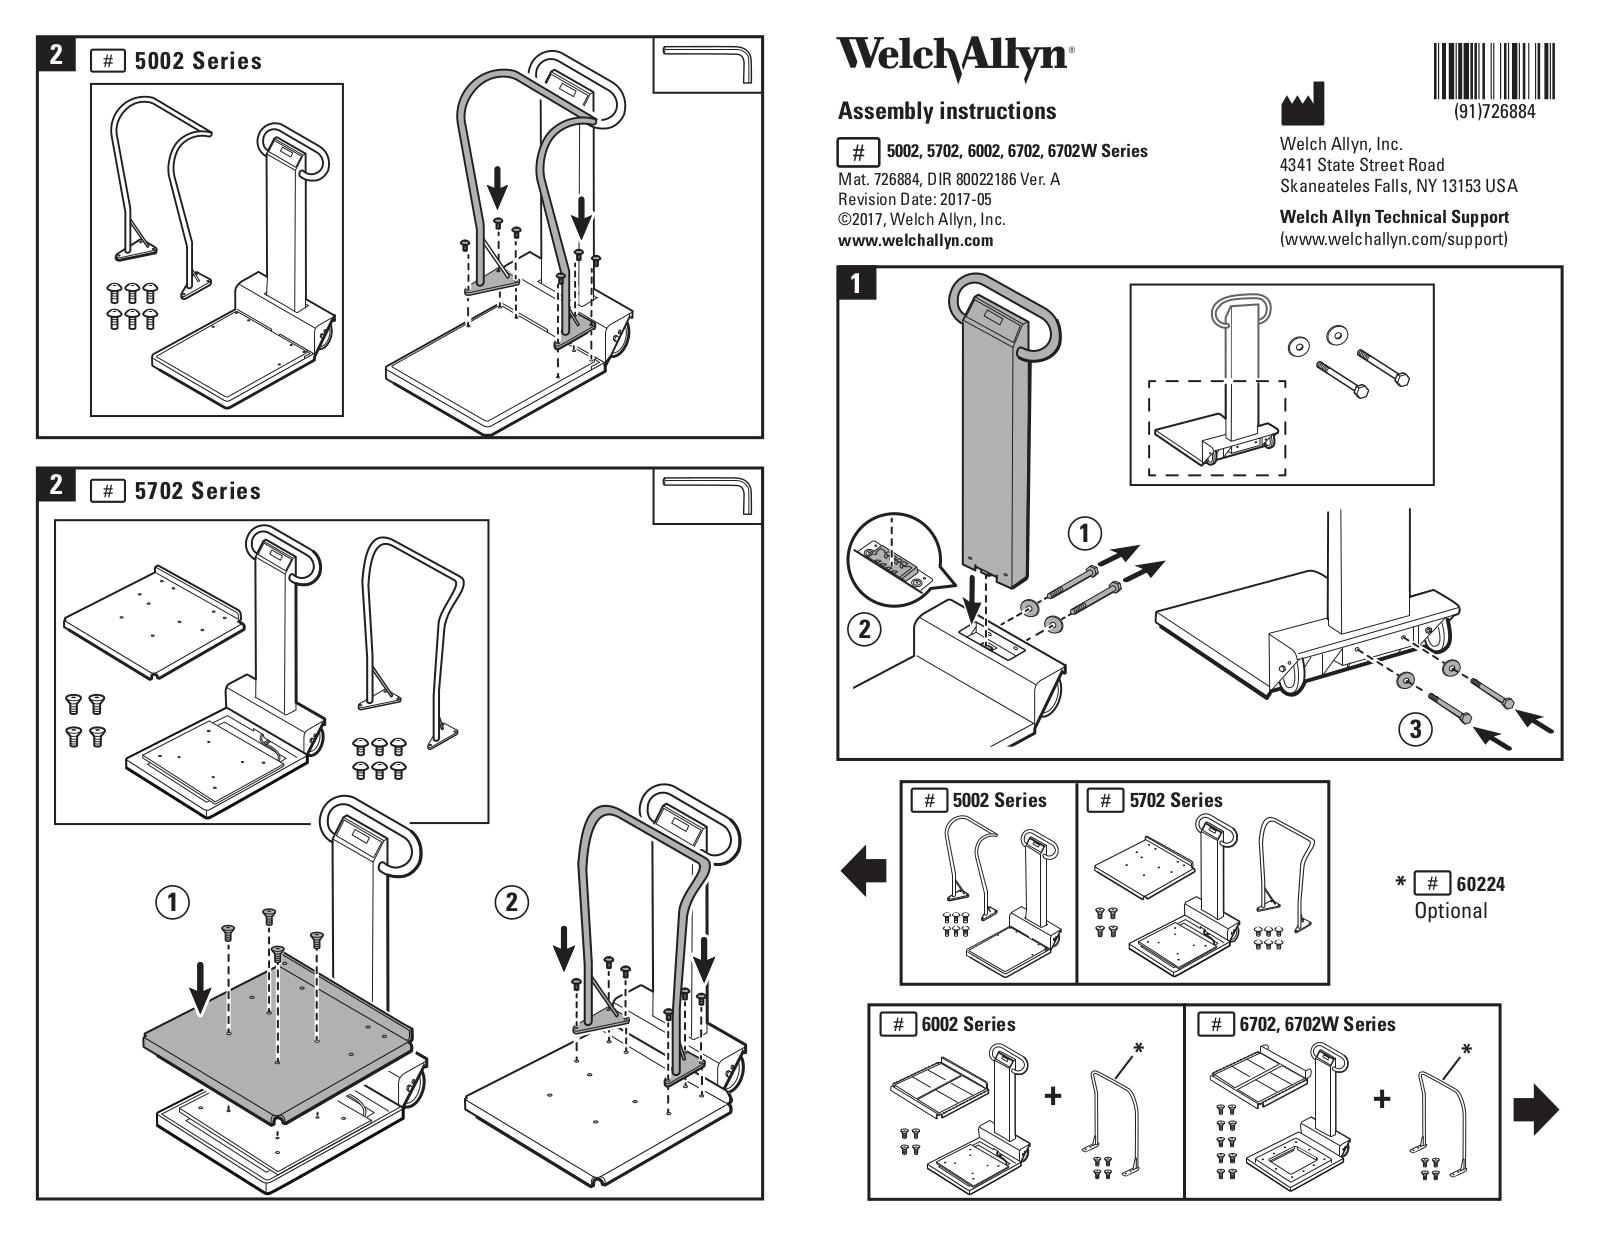 Welch Allyn 5002 Series, 6002 Series, 5702 Series, 6702 Series, 6702W Series Assembly Instructions Manual